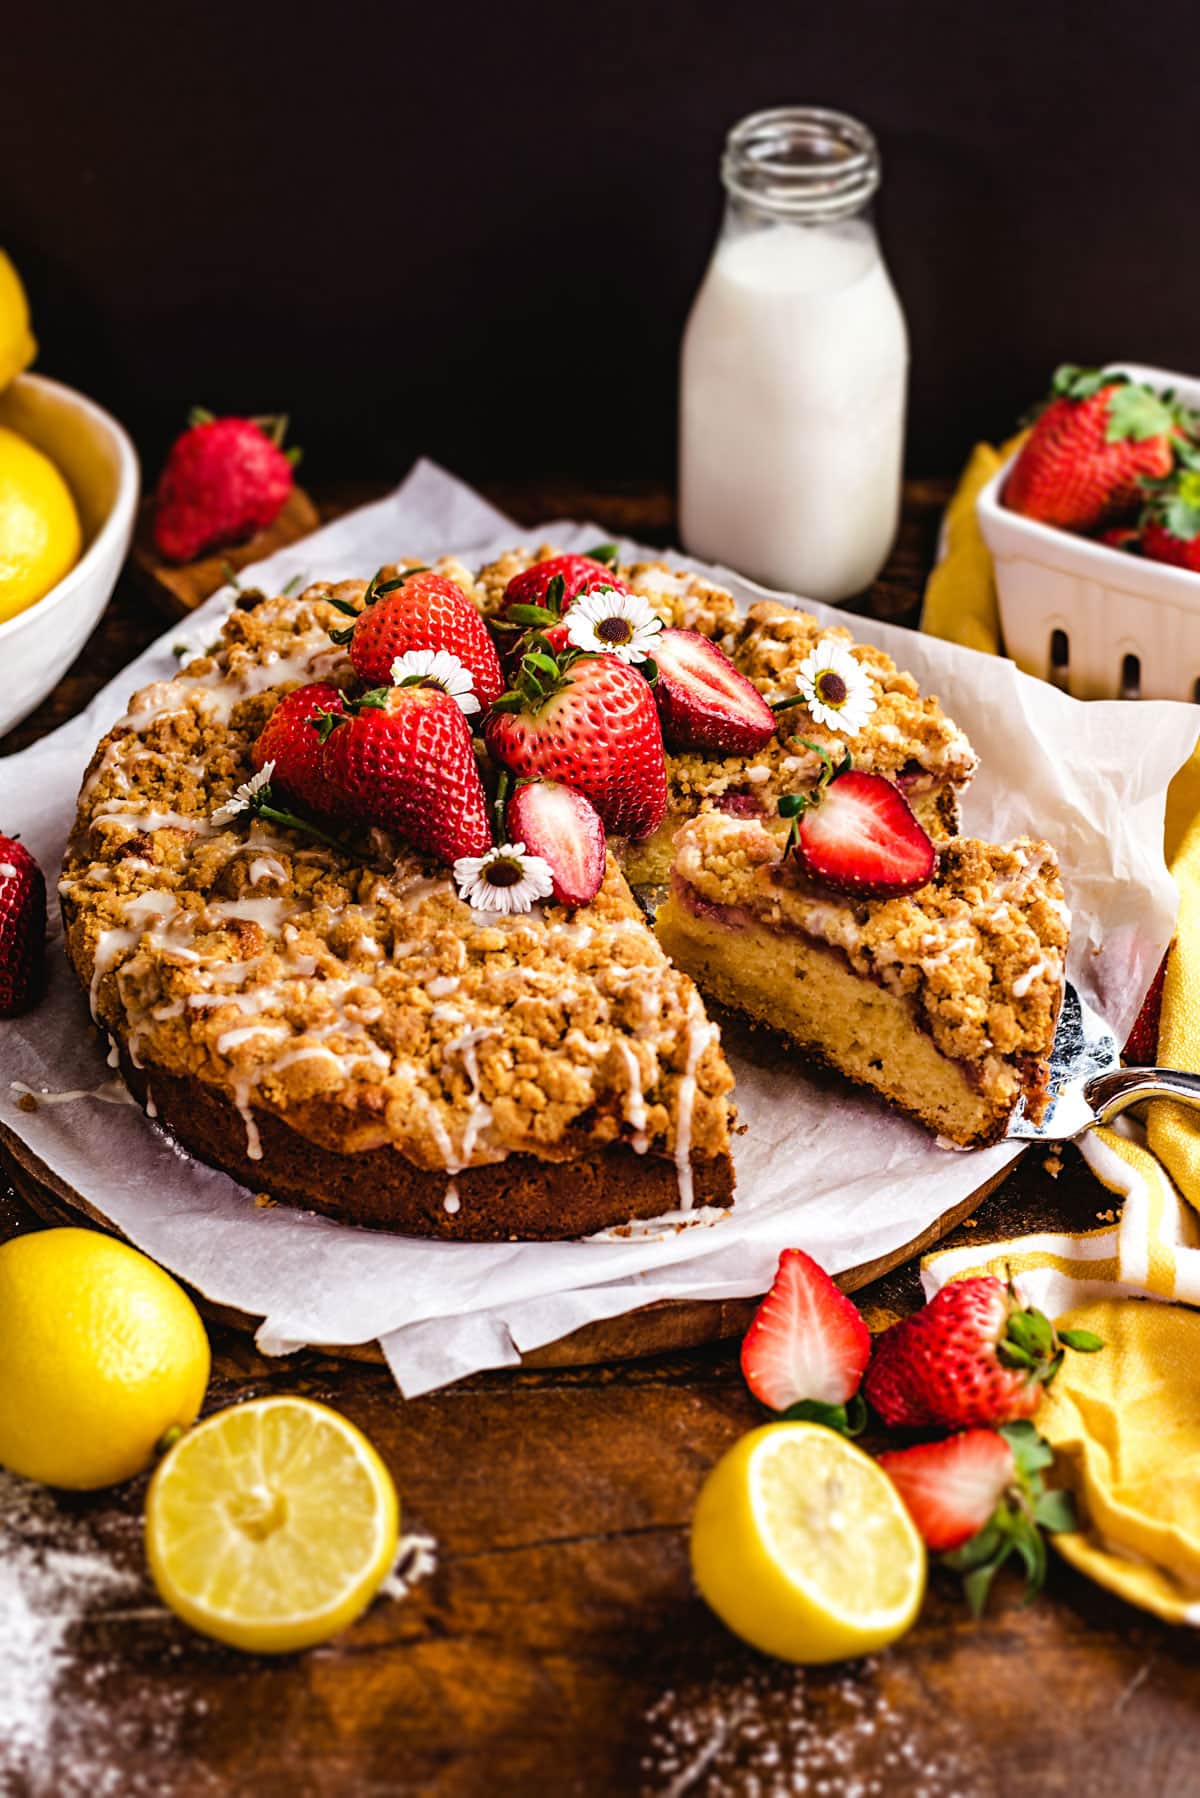 This buttery, bright Strawberry Lemon-Ricotta Crumb Cake features a layer of fresh sliced strawberries, a crumbly streusel topping, and a drizzle of sweet glaze atop a moist lemon cake. Serve it for an elegant breakfast, brunch, or dessert, and make lemon-lovers out of everyone who takes a bite.